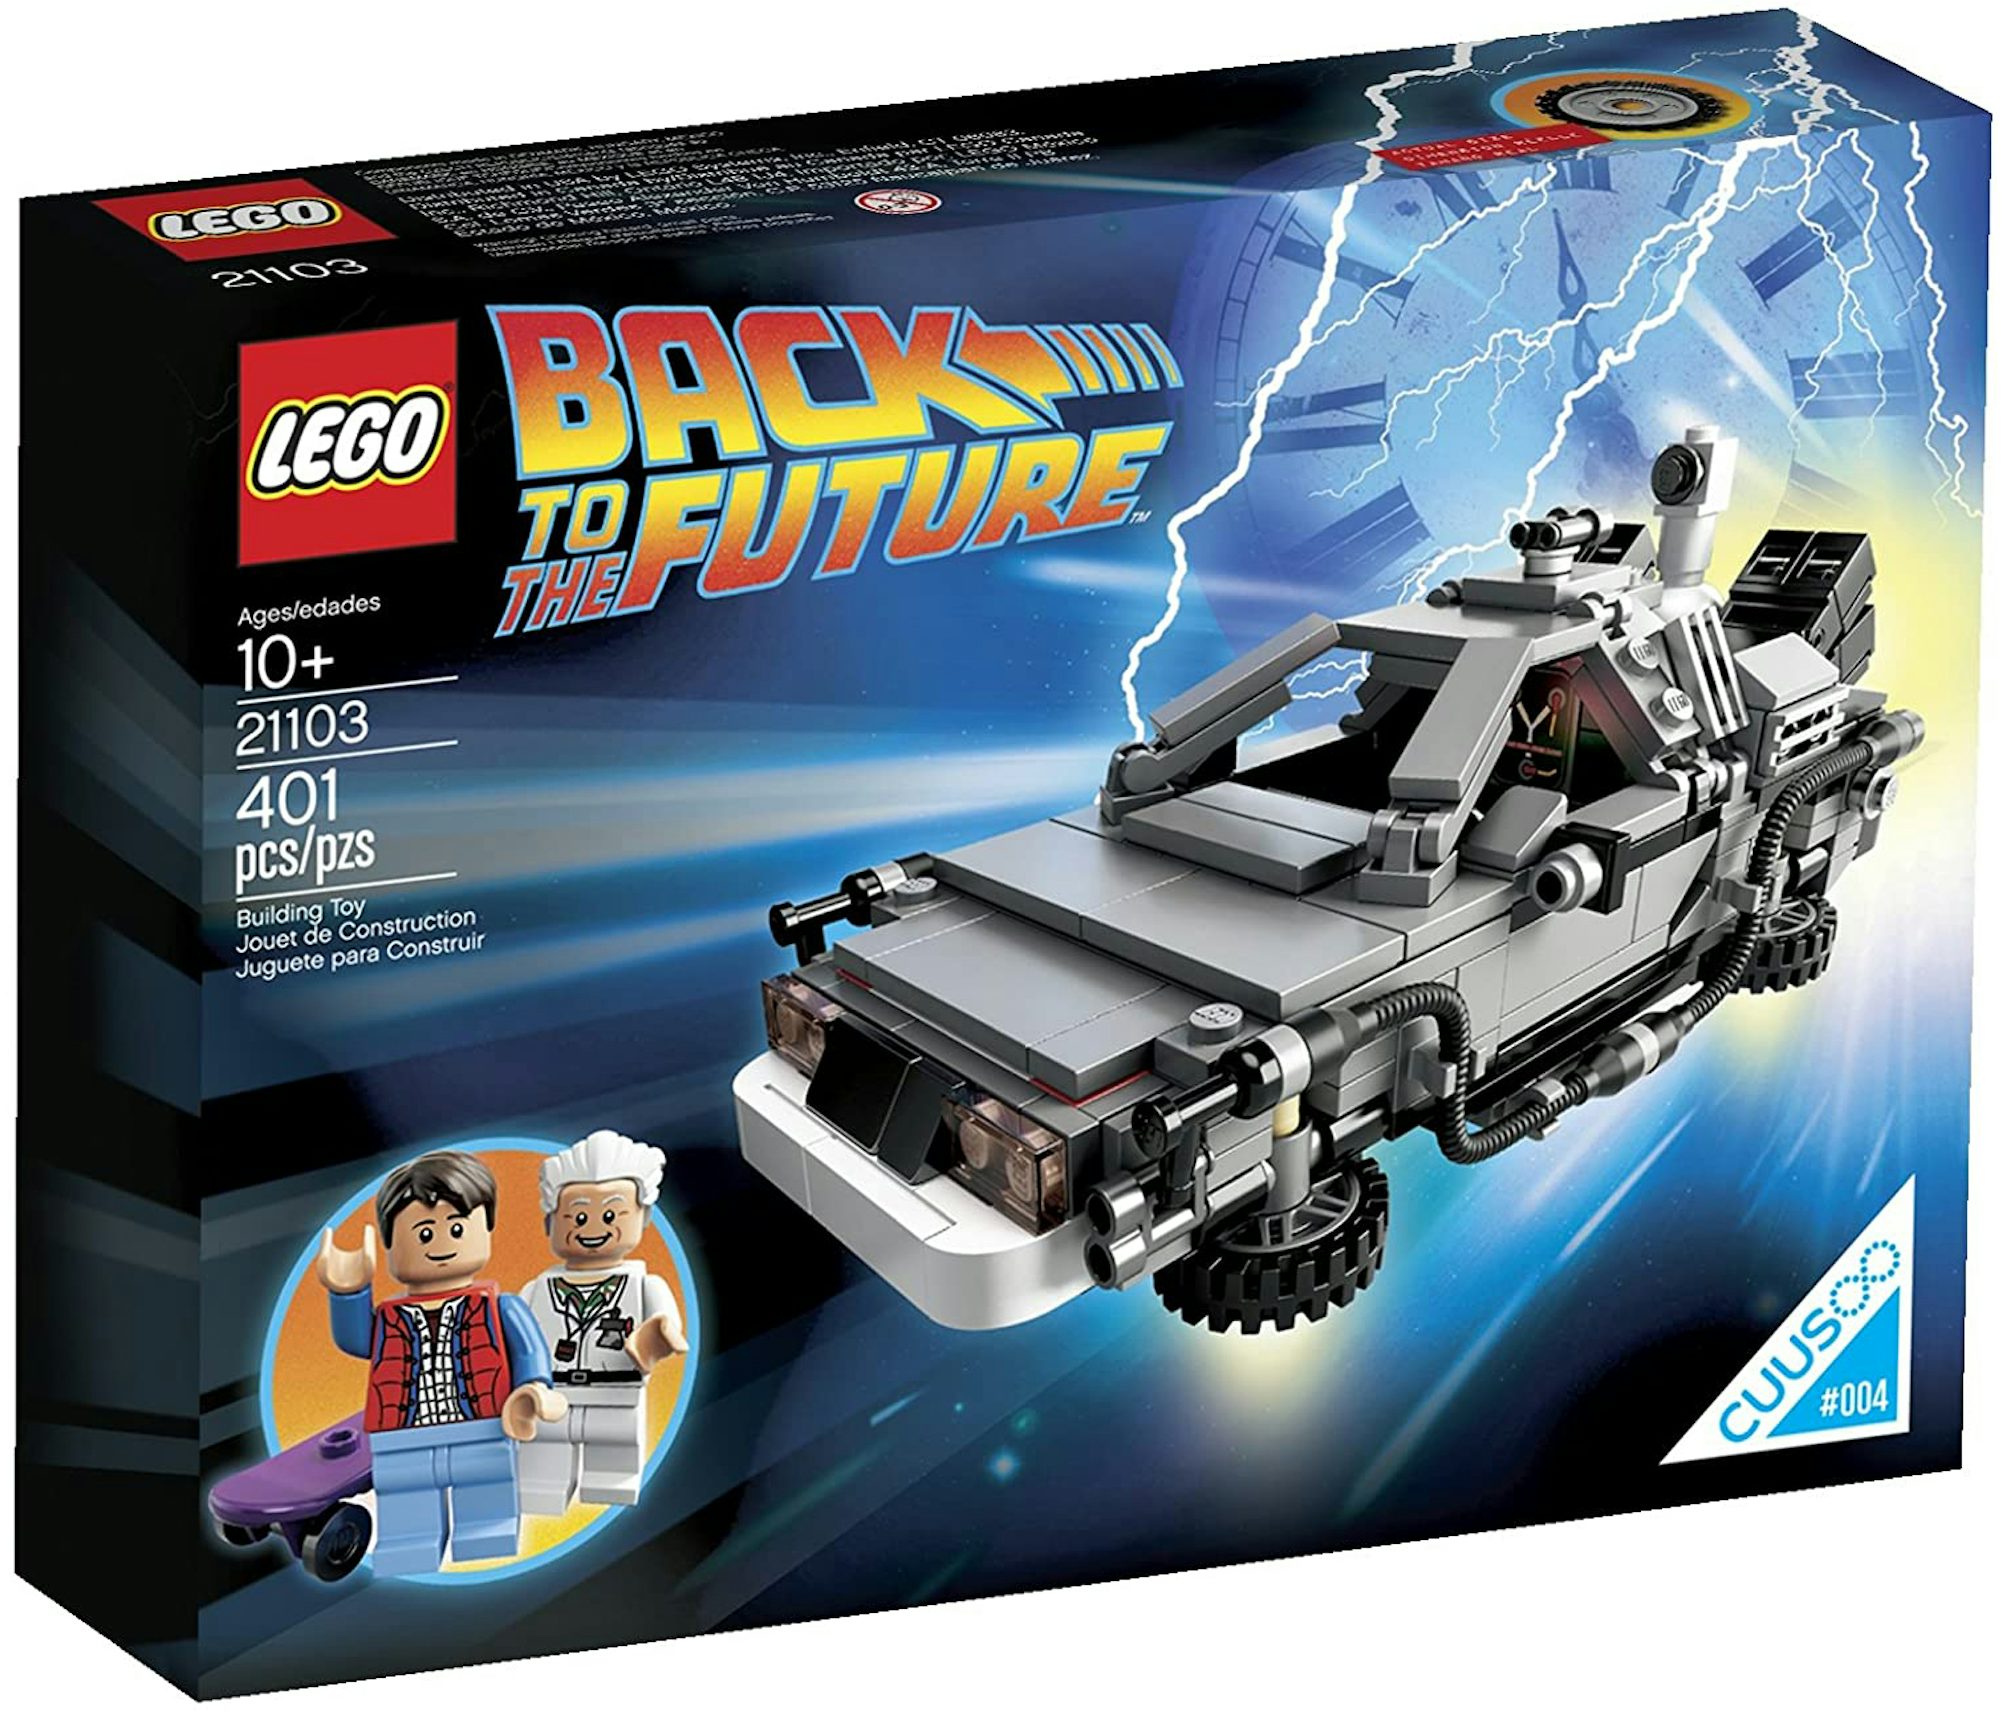 https://images.stockx.com/images/Lego-Back-To-The-Future-The-DeLorean-Time-Machine-Set-21103.jpg?fit=fill&bg=FFFFFF&w=1200&h=857&fm=jpg&auto=compress&dpr=2&trim=color&updated_at=1646412296&q=60